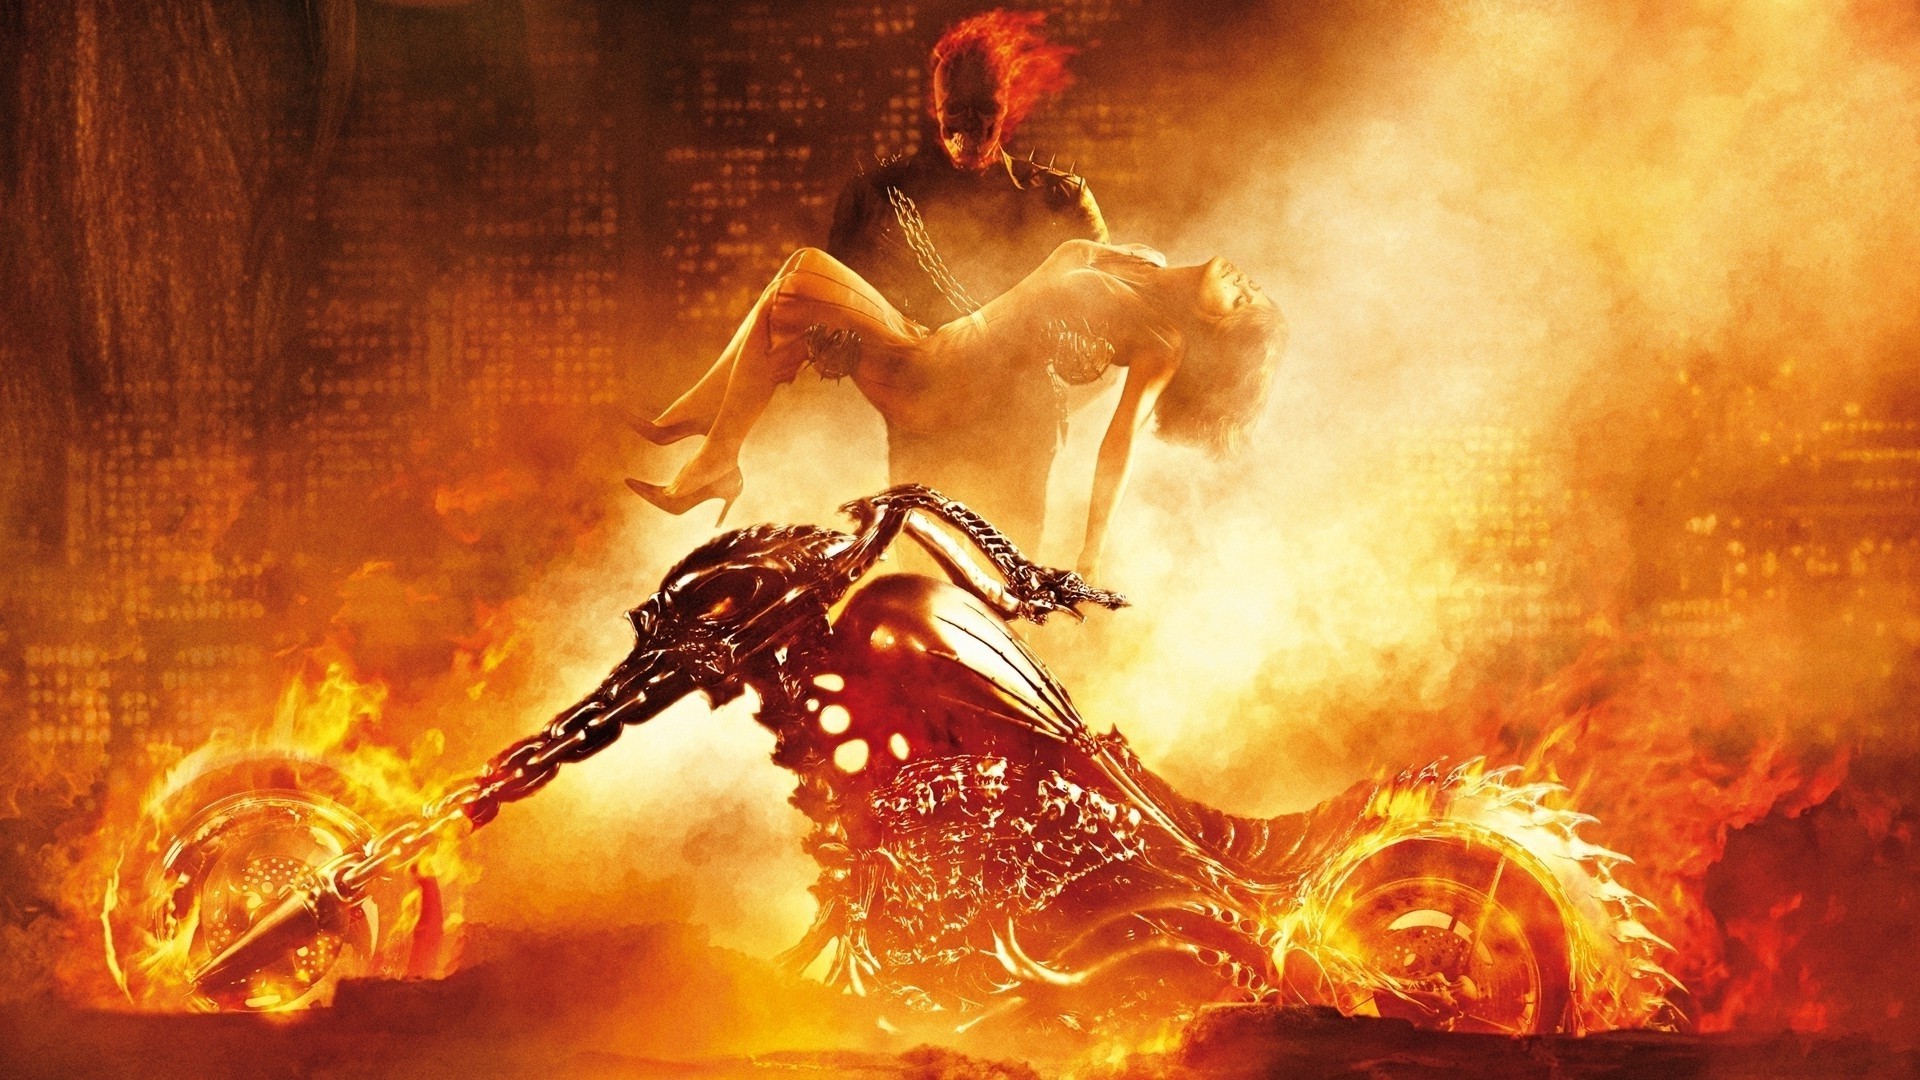 more items about wallpaper ghost rider 2 ghost rider iphone wallpaper...